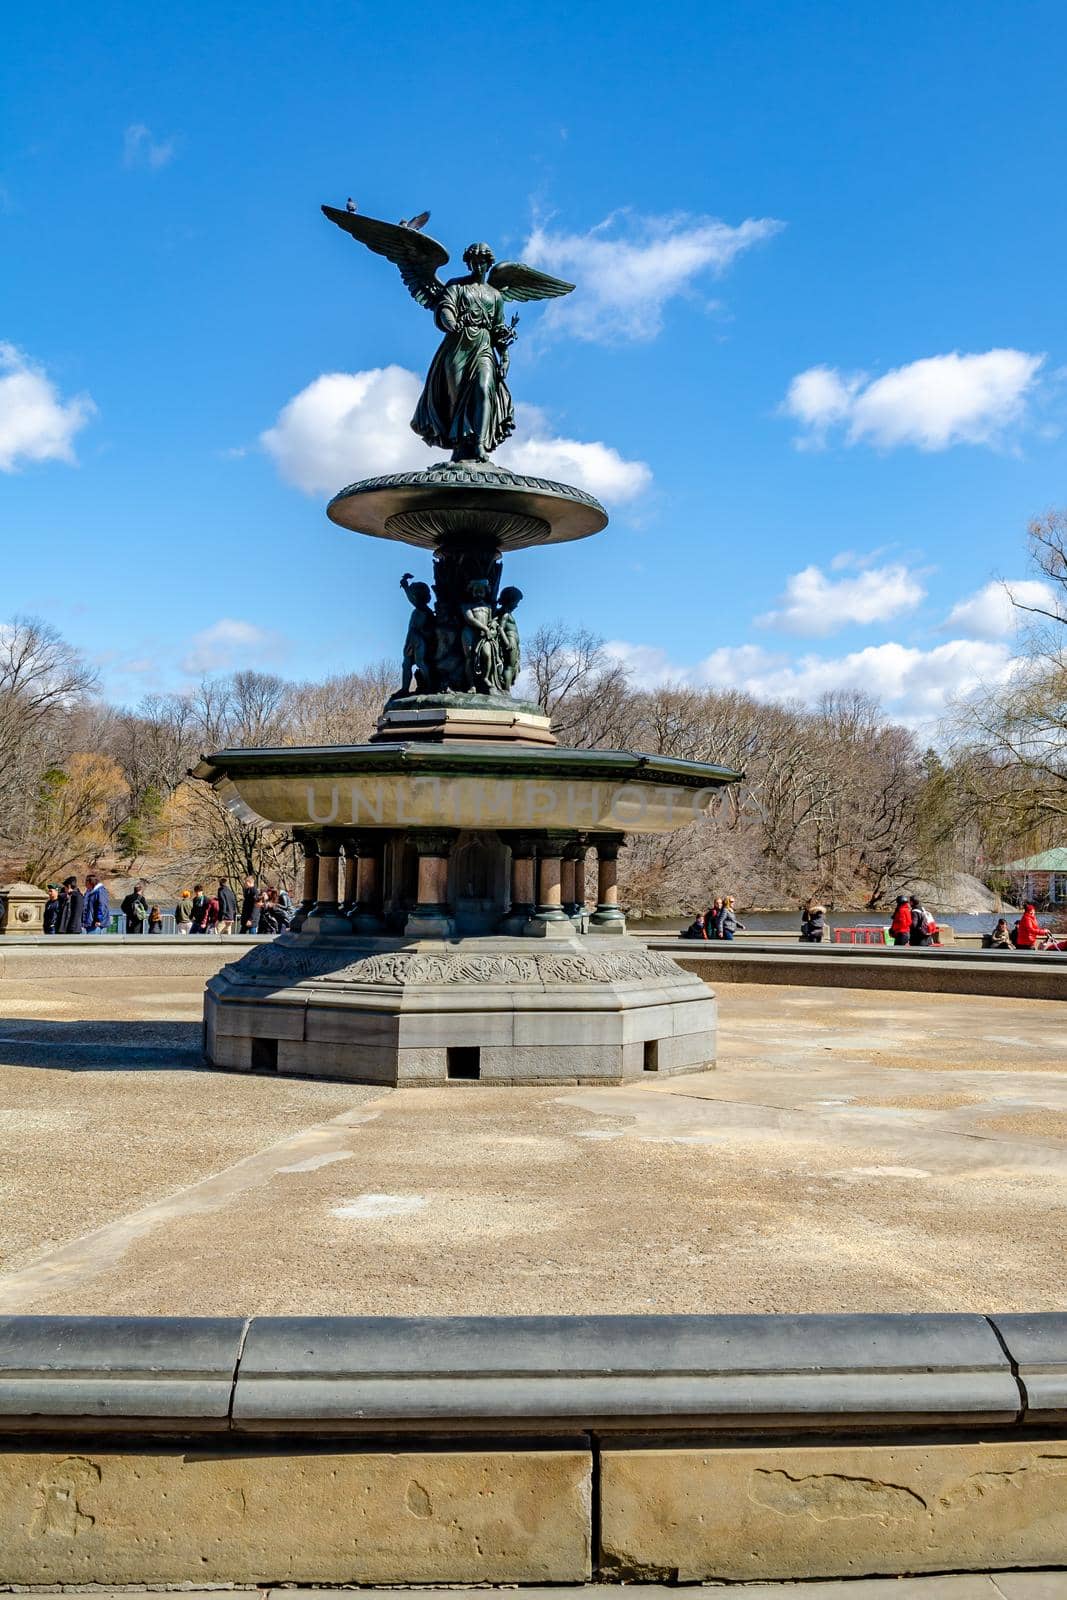 Bethesda Fountain with Angel of the Waters Sculpture, Central Park New York by bildgigant